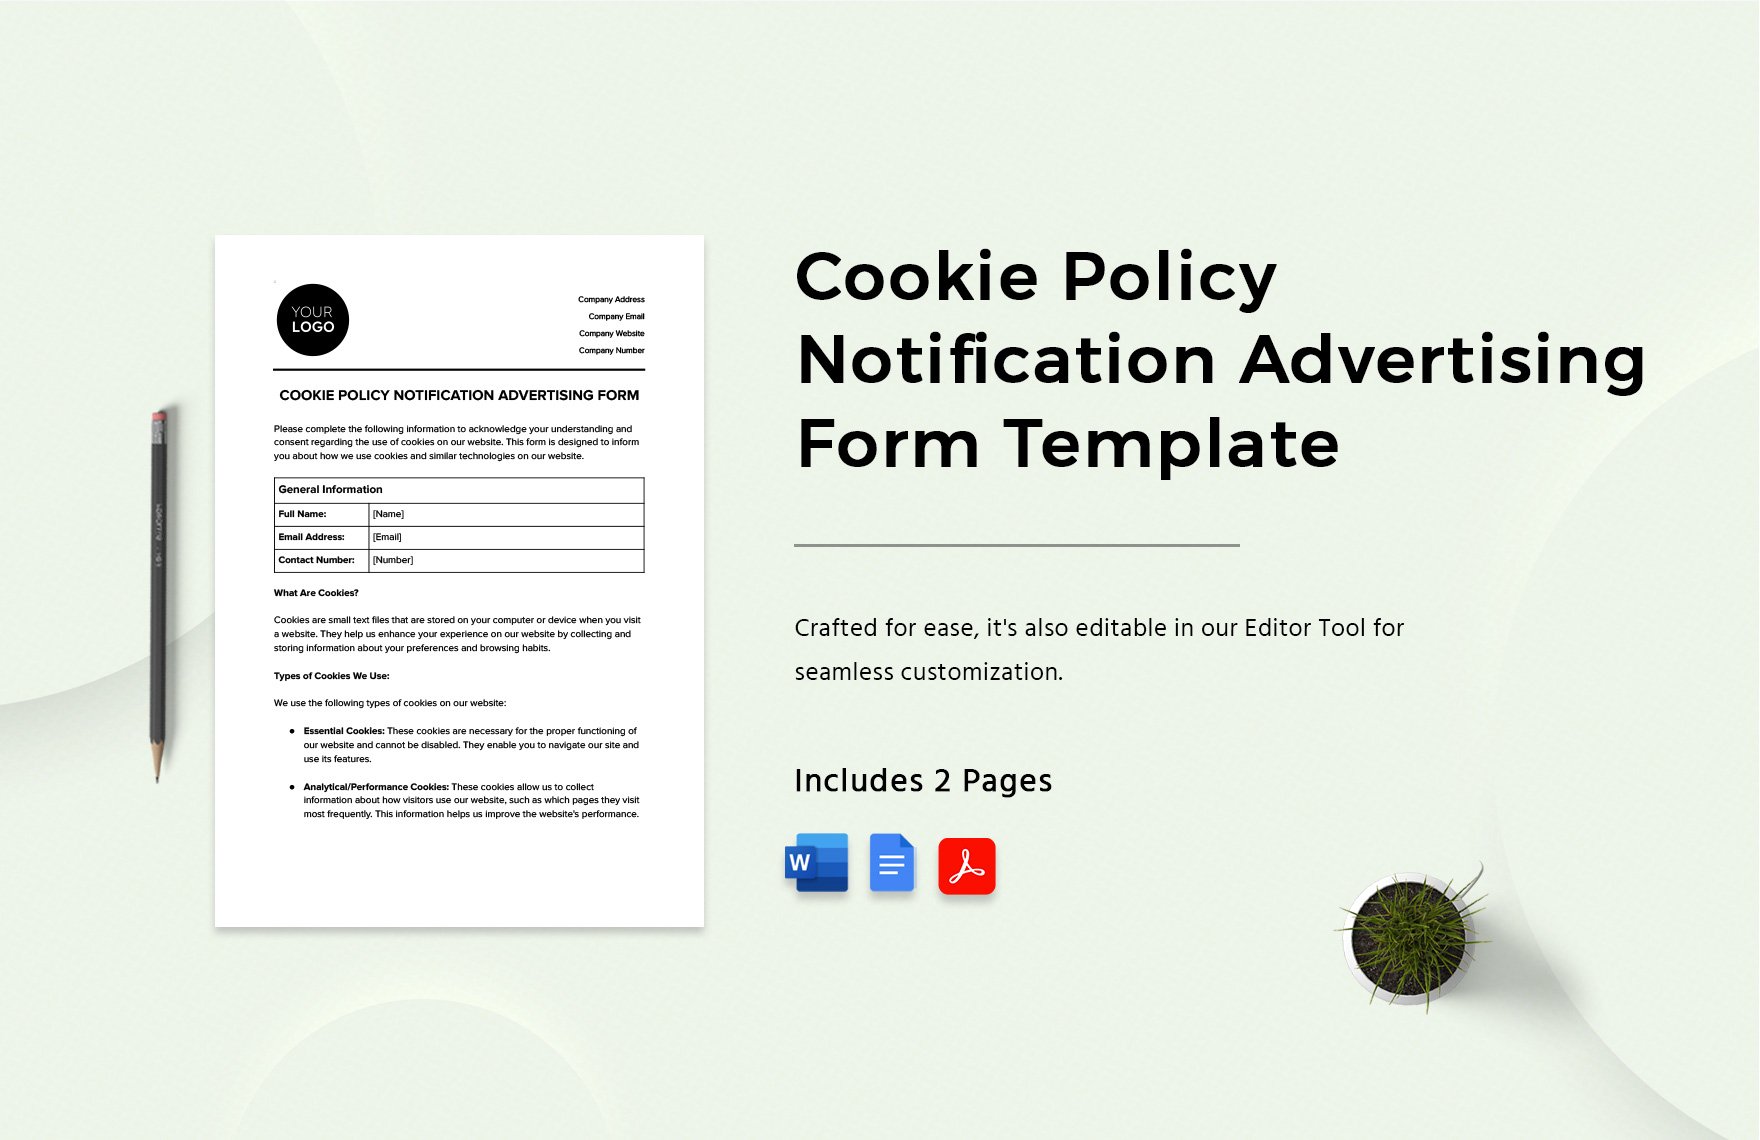 Cookie Policy Notification Advertising Form Template